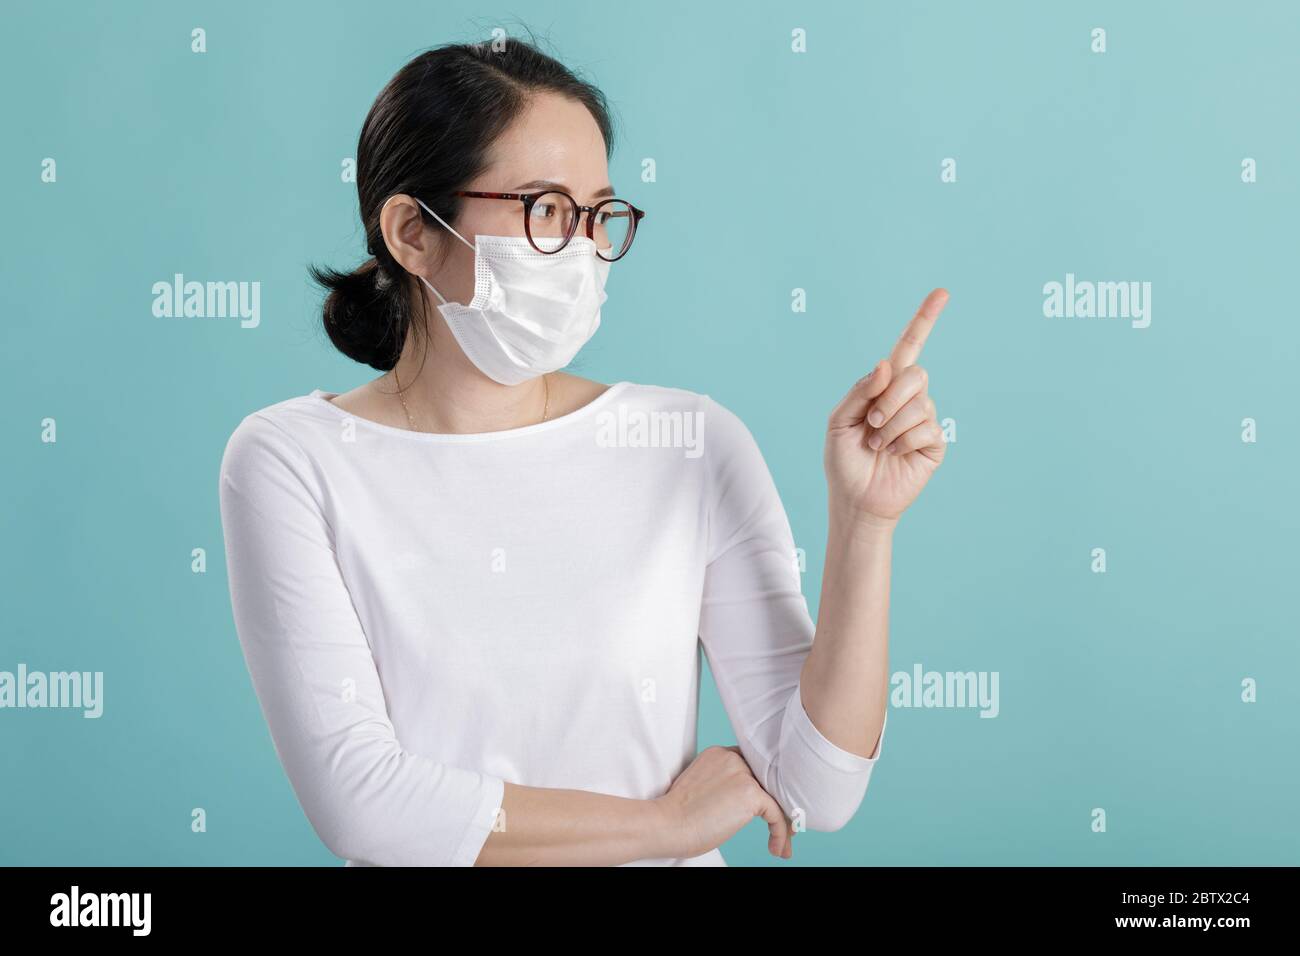 Asian young girl is wearing medical face masks to protect themselves from pollution Coronavirus flu virus, New coronavirus 2019-nCoV from China, Empty Stock Photo